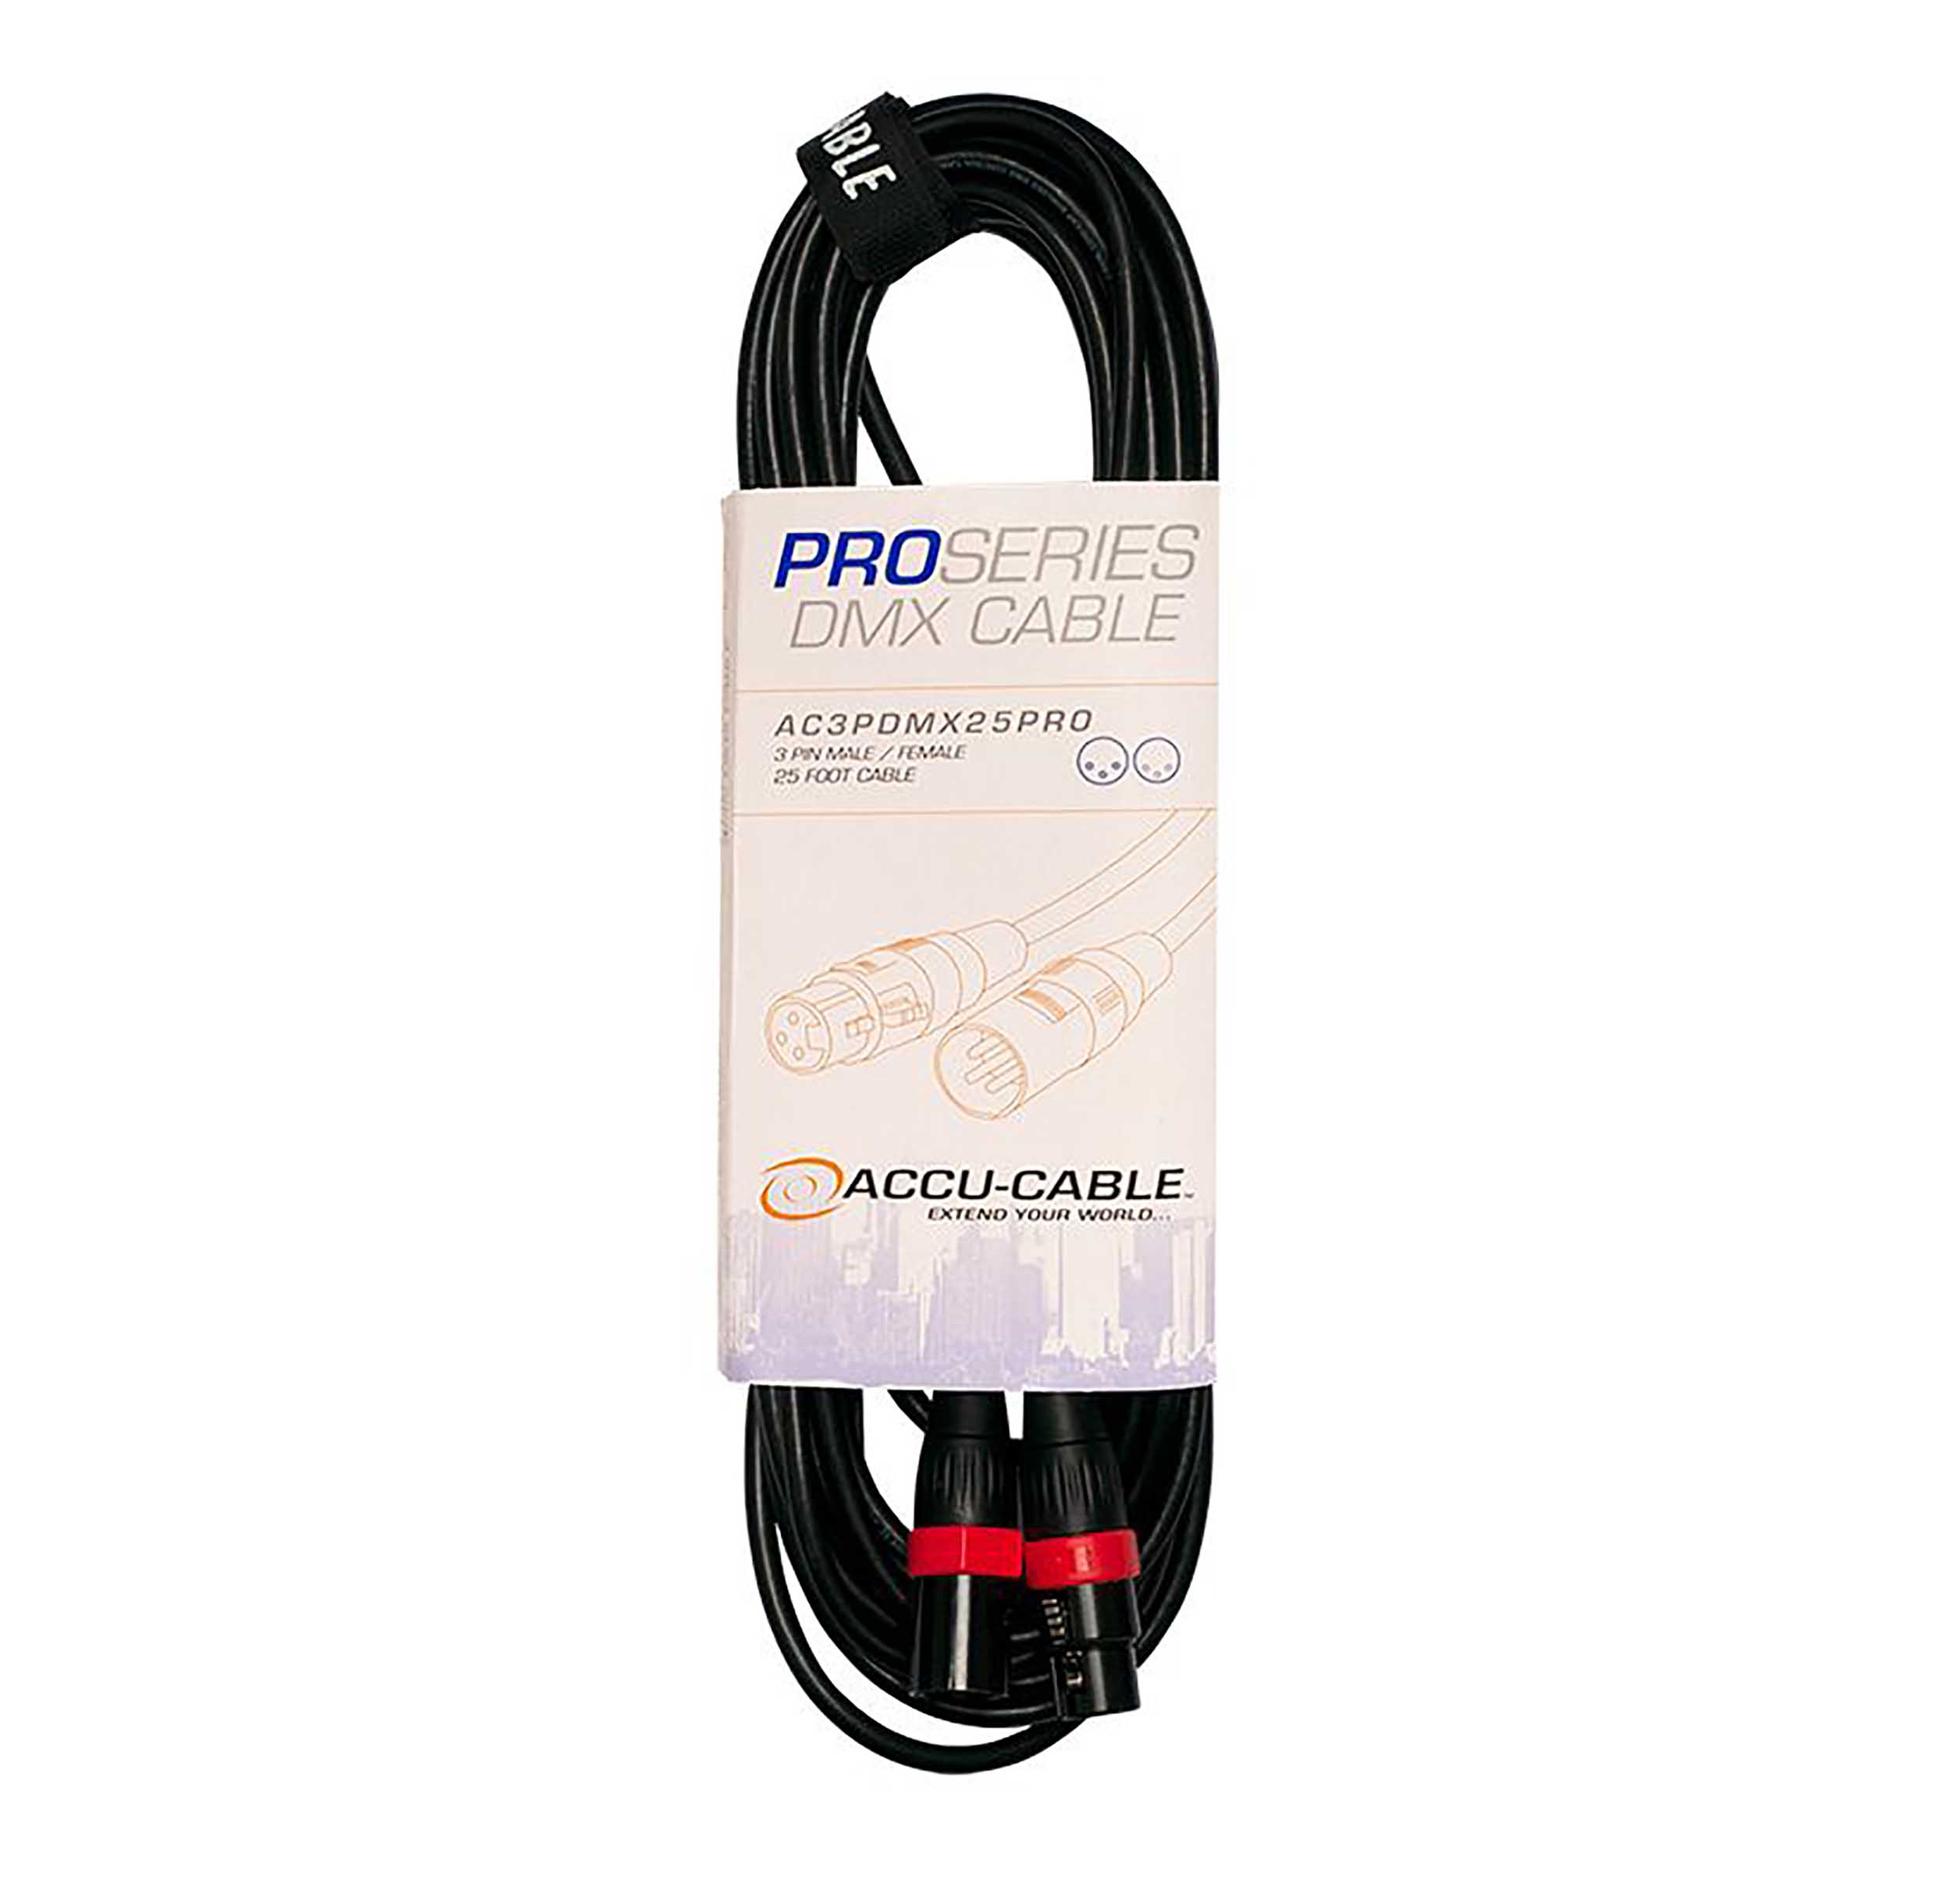 Accu-Cable AC3PDMX25PRO, Pro Series 3-Pin Male to 3-Pin Female Connection DMX Cable - 25 Ft by Accu Cable